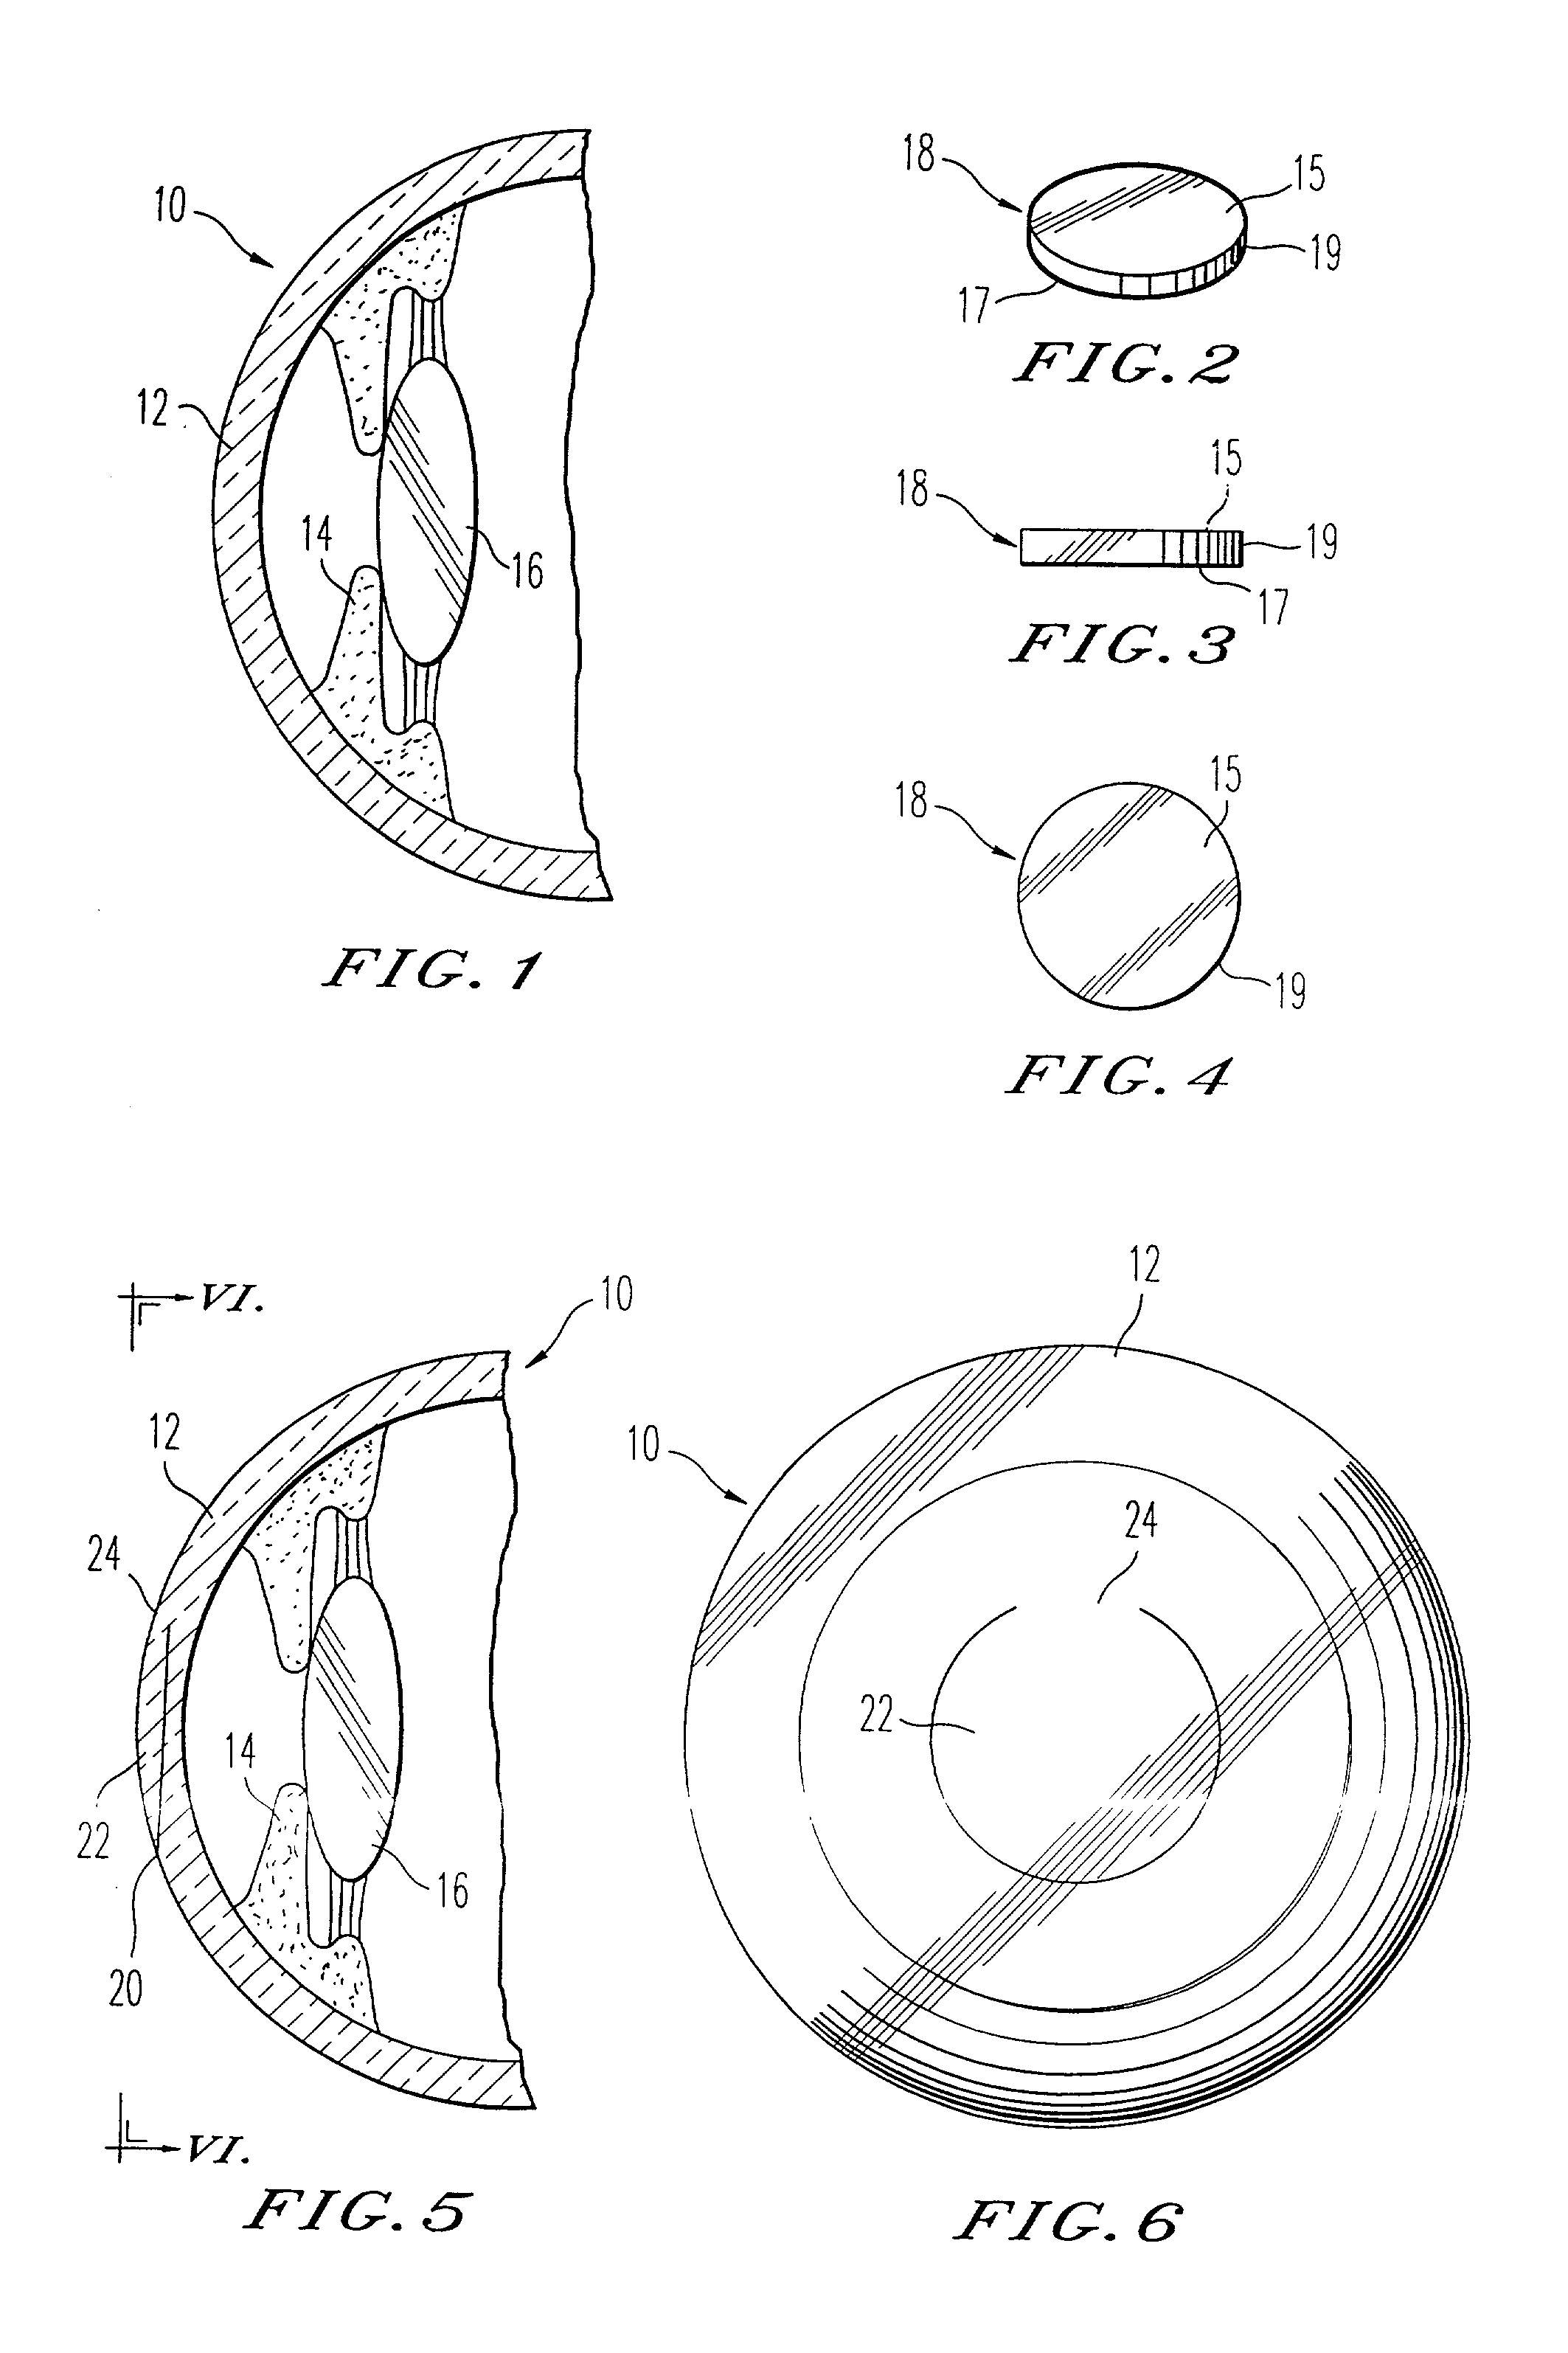 Adjustable universal implant blank for modifying corneal curvature and methods of modifying corneal curvature therewith